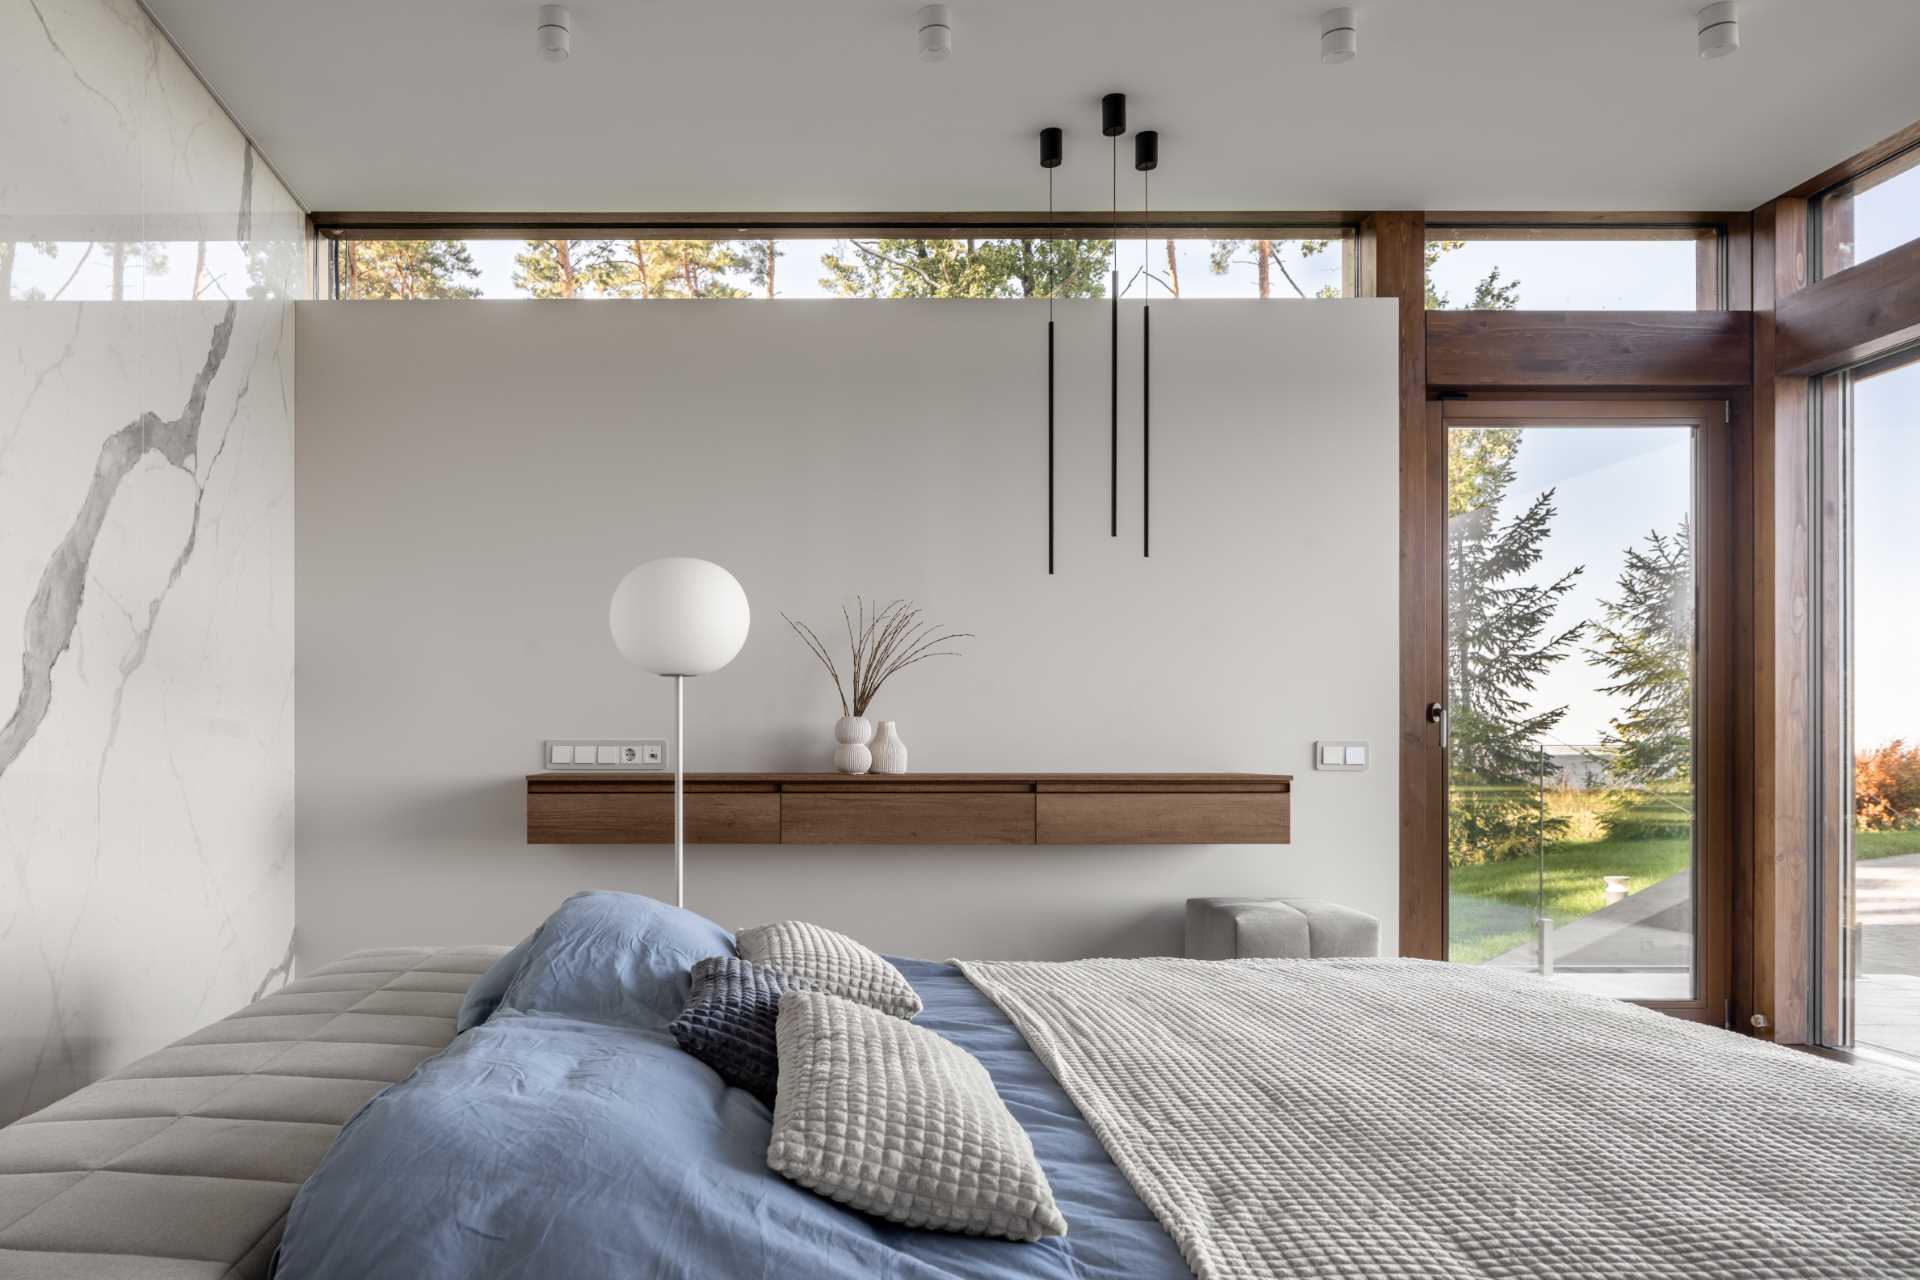 A modern bedroom with a floating wood shelf.